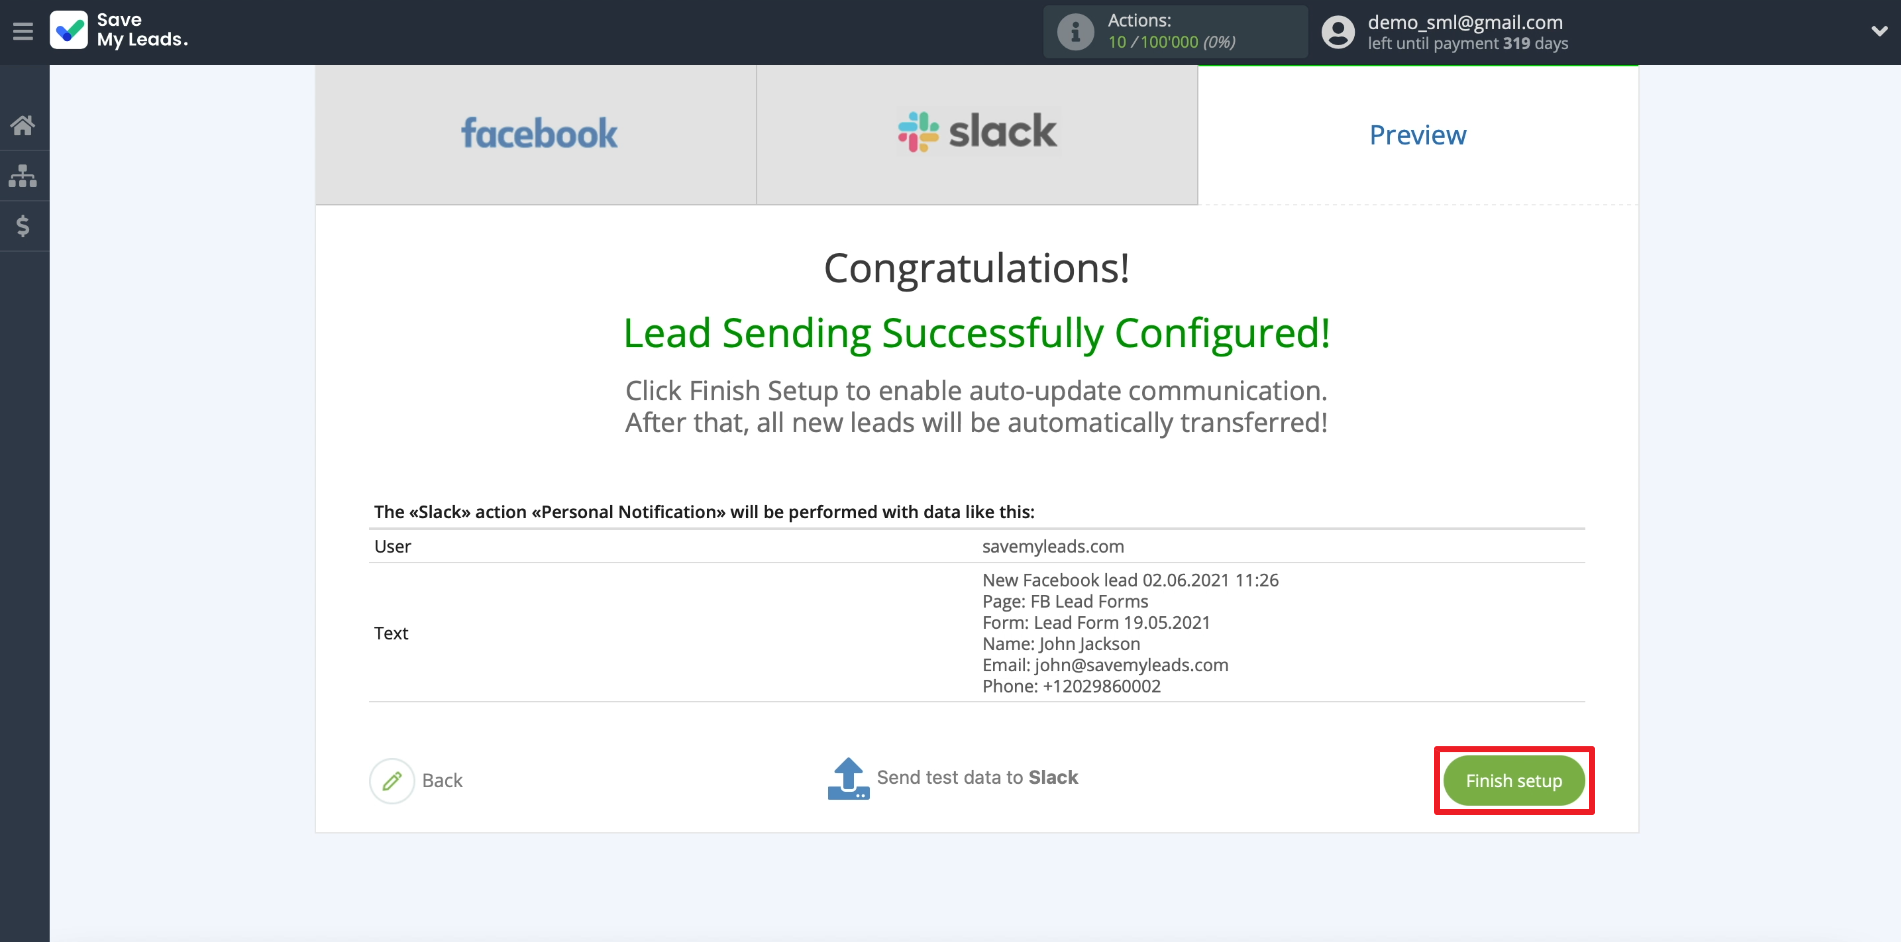 How to set up the upload of new leads from Facebook ad account to Slack private messages |&nbsp;Finishing the setup